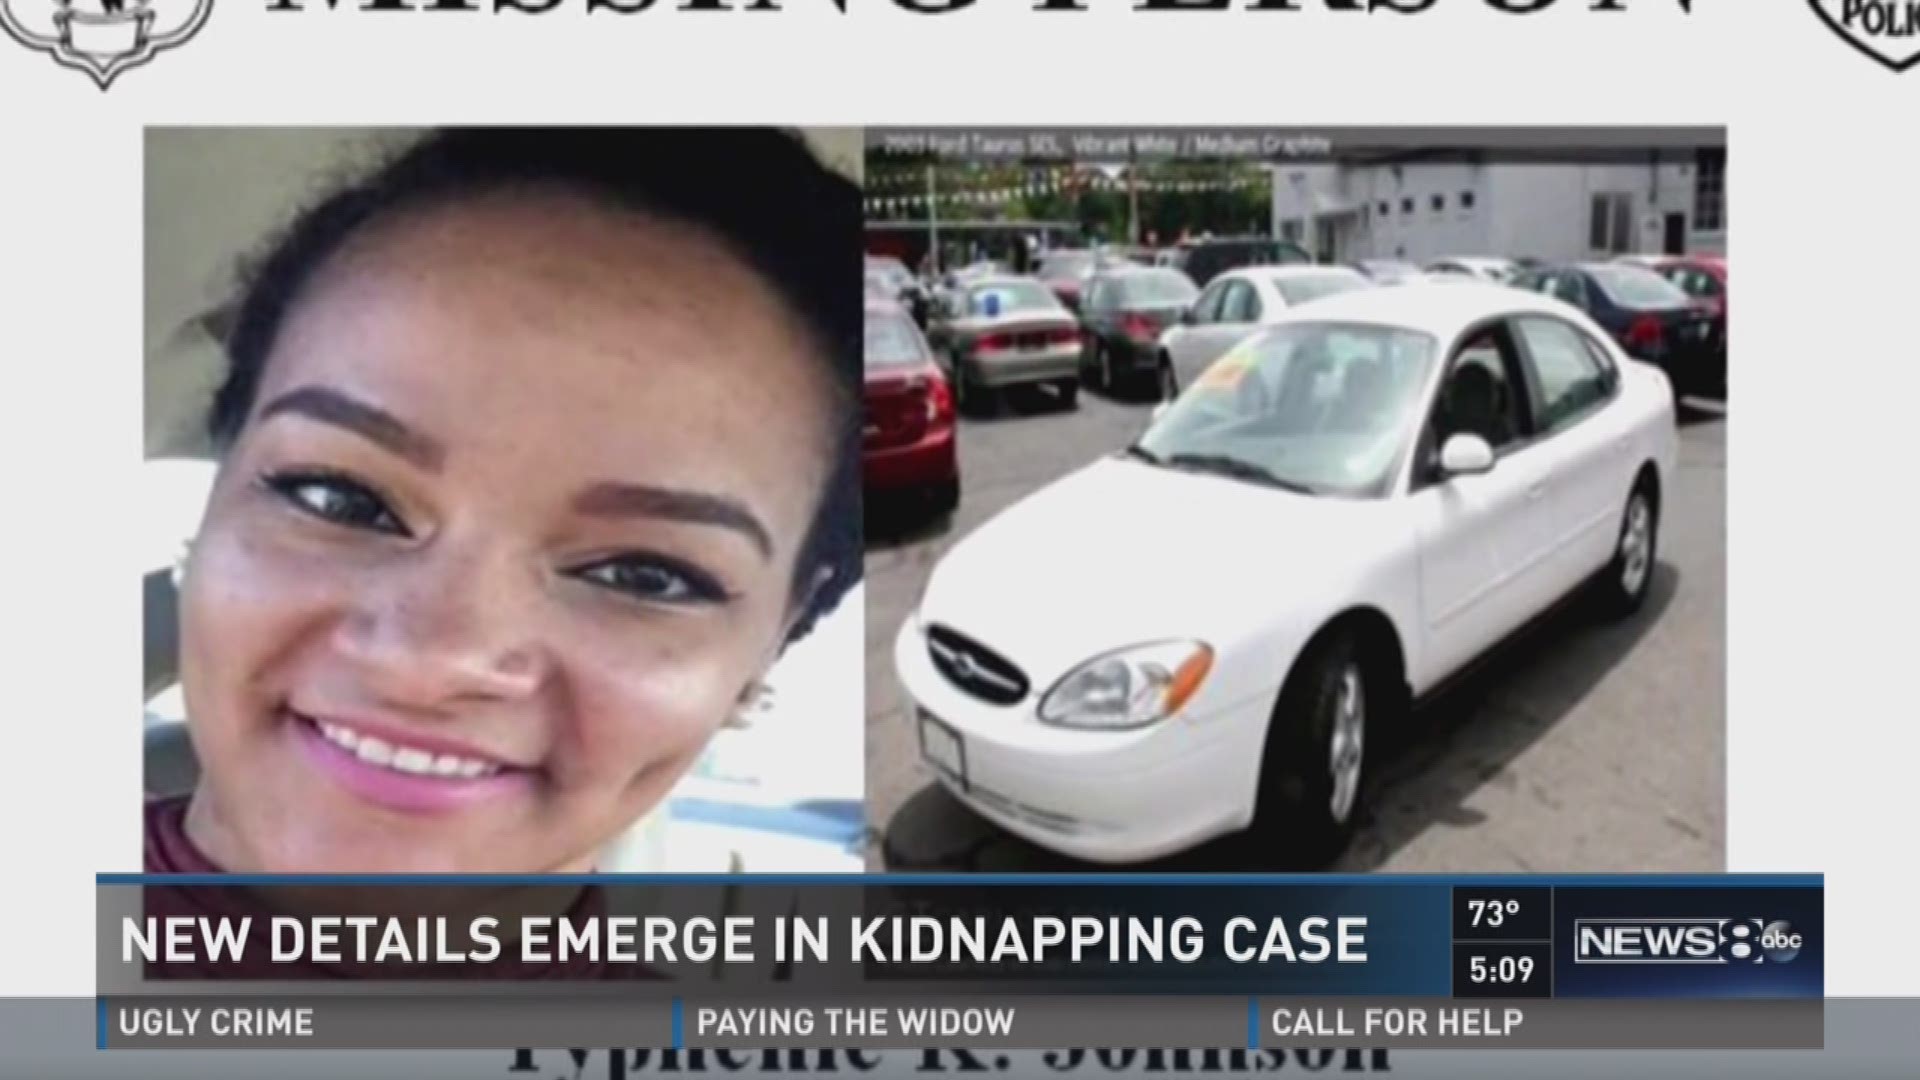 New details emerge in kidnapping case